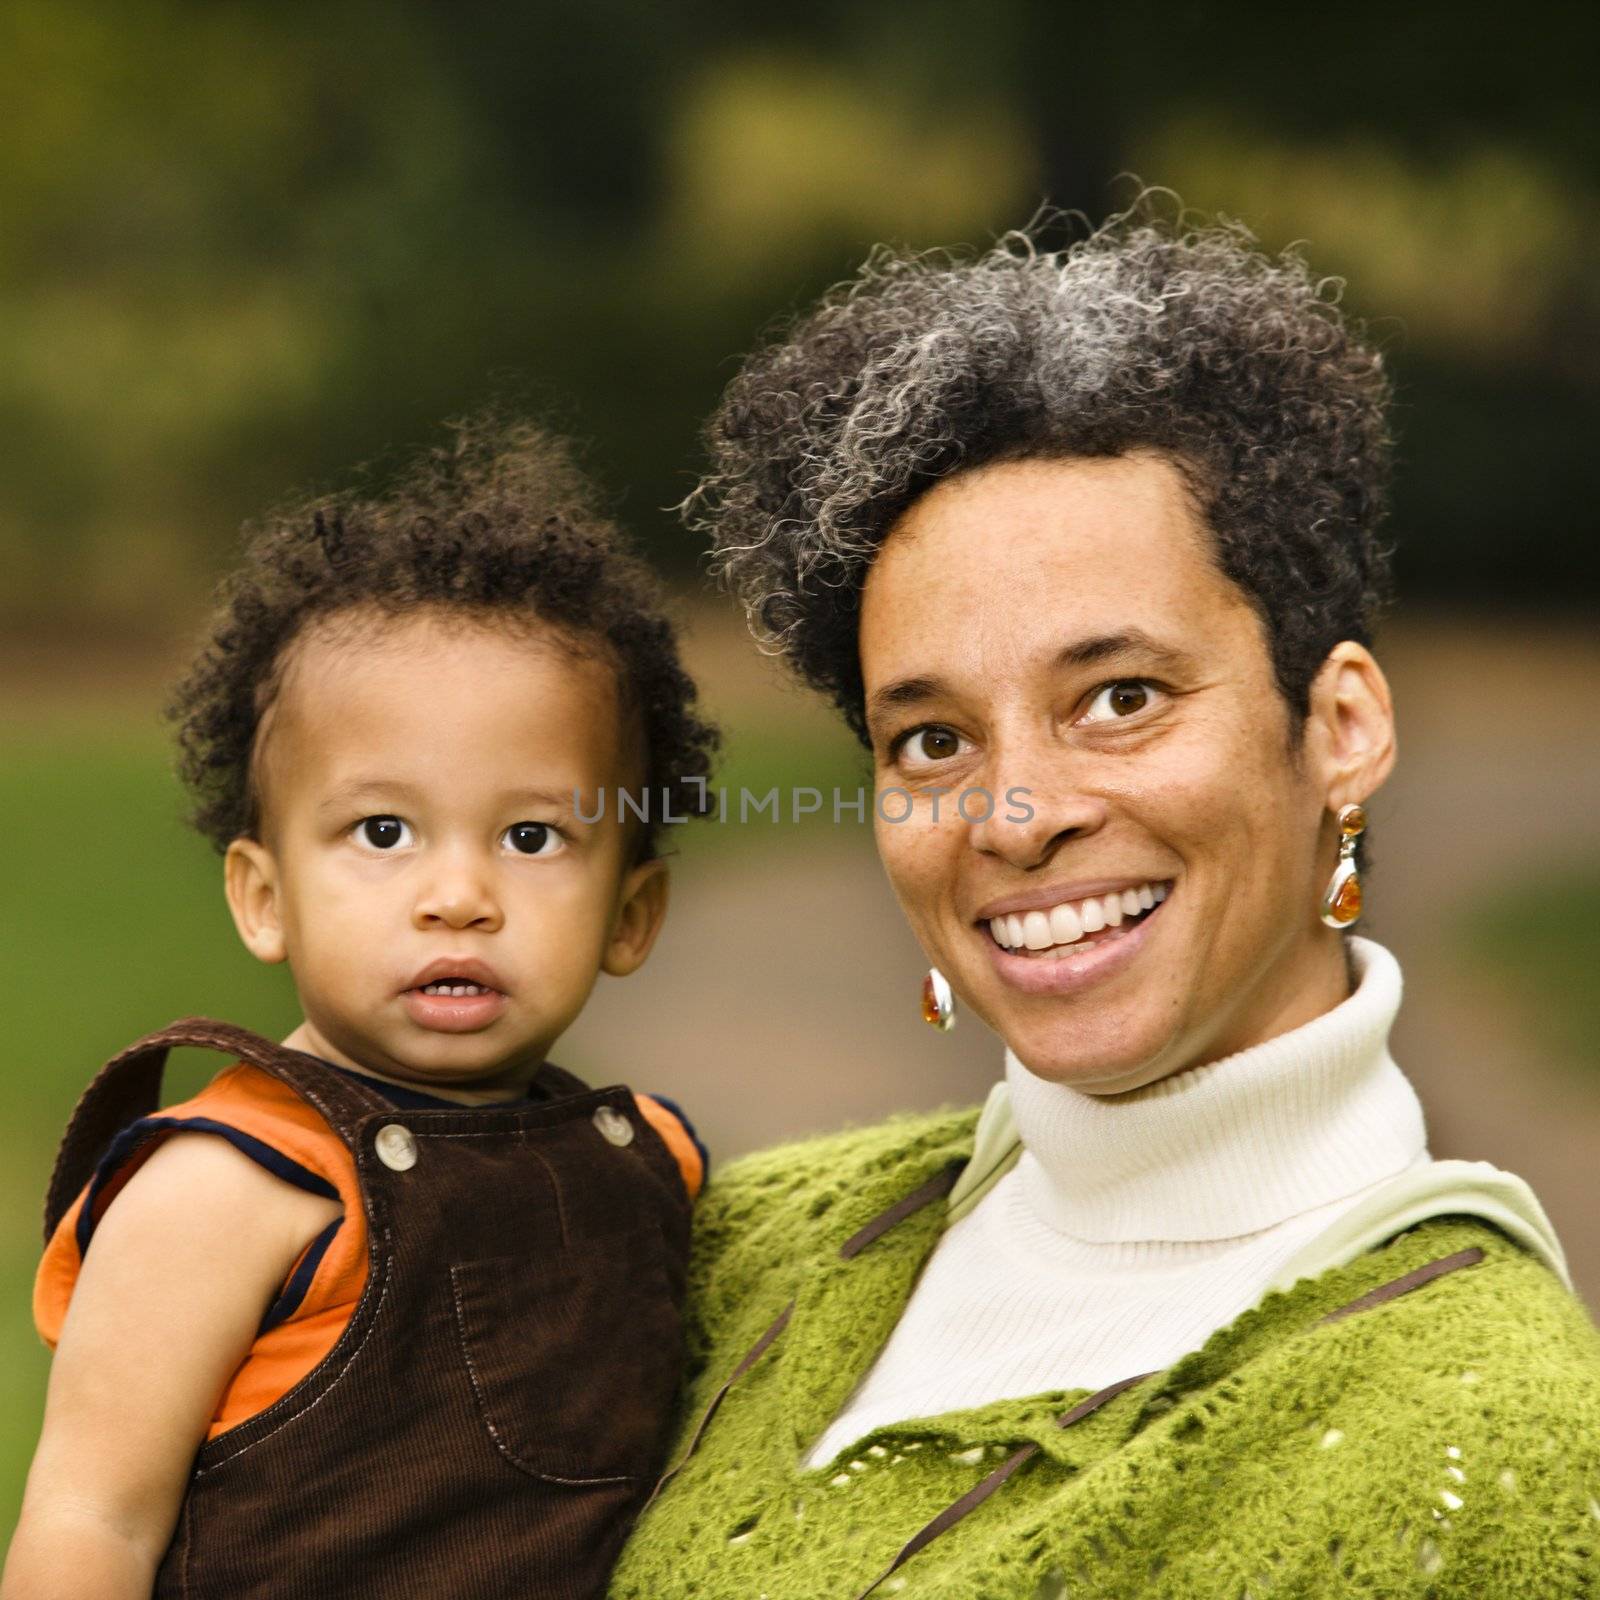 Head and shoulder portrait of woman holding boy and smiling.